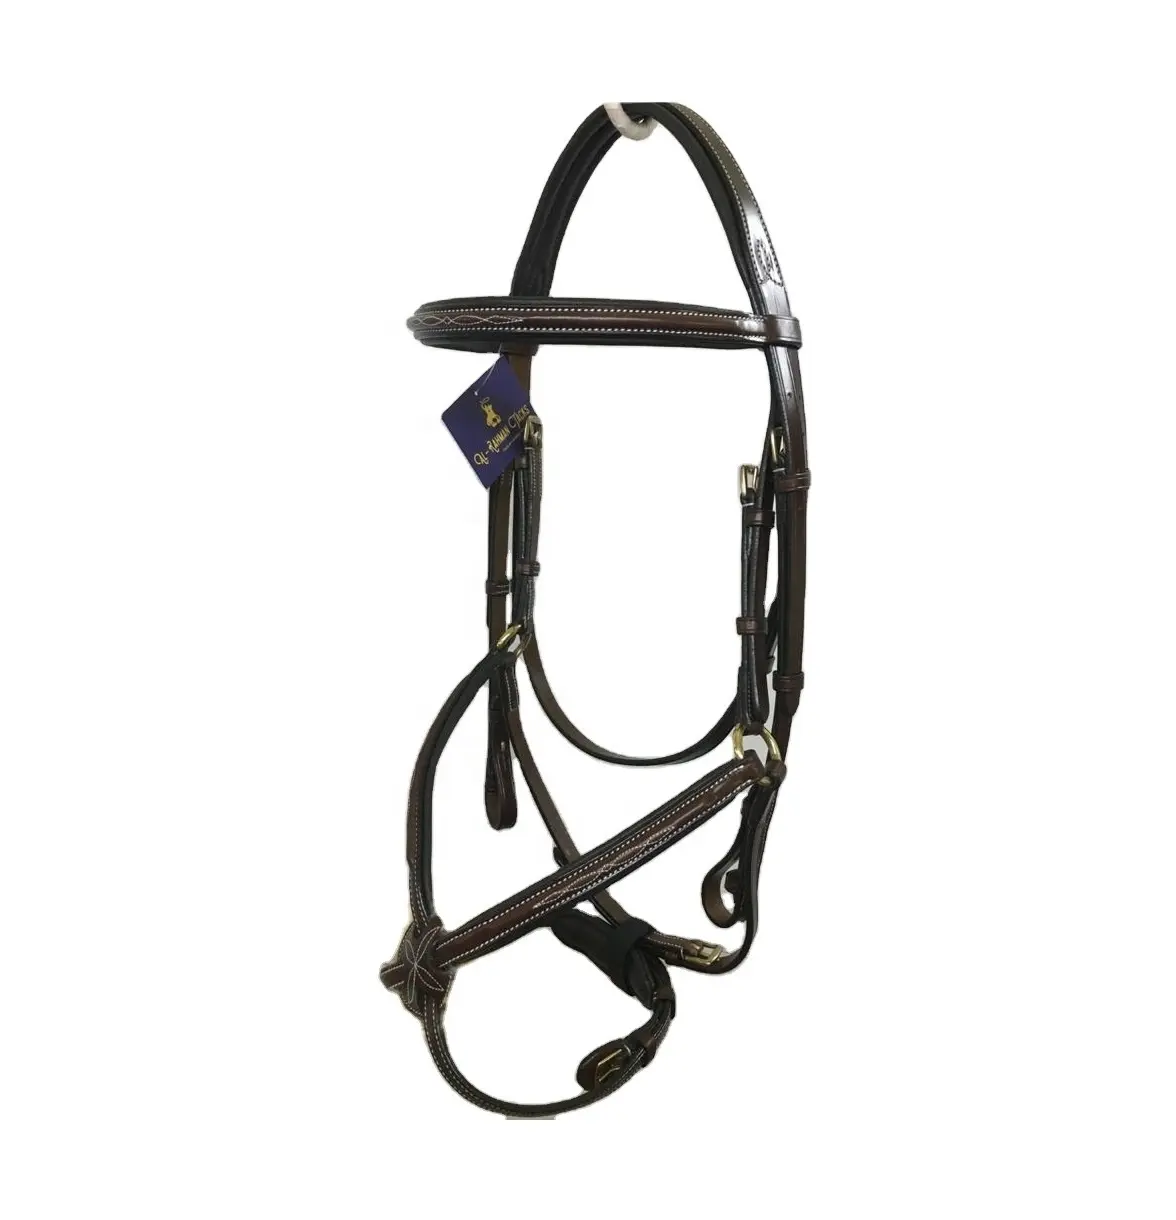 Horse bridle Premium Quality Mexican Style Genuine Horse Bridle